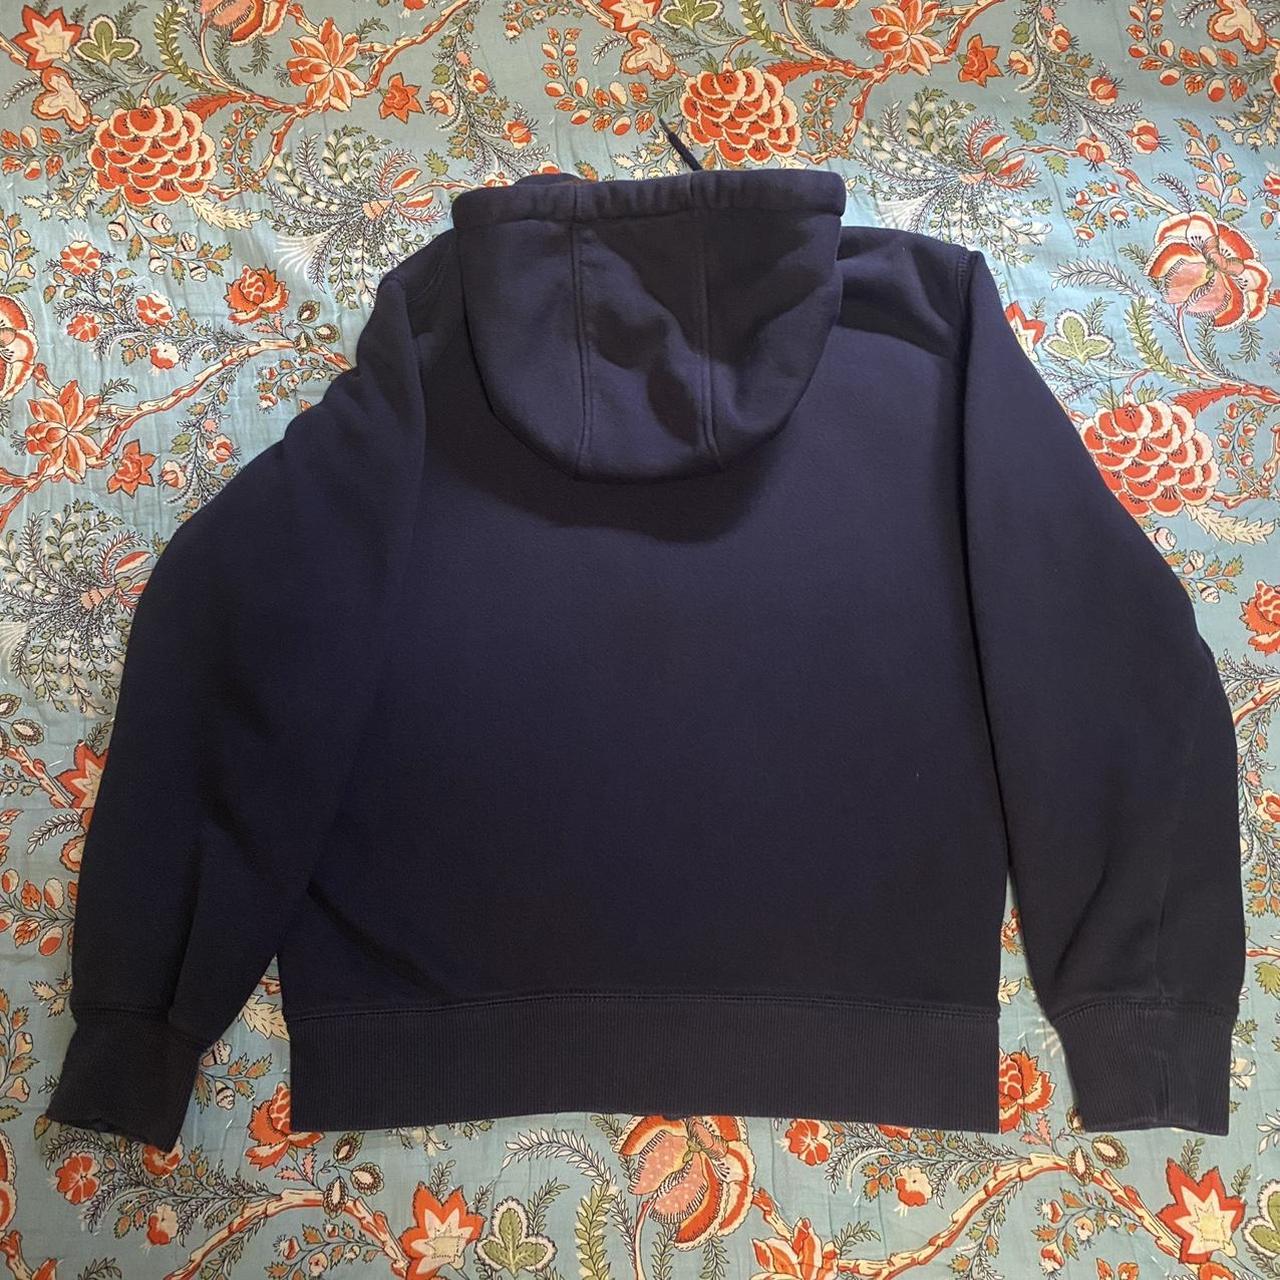 Uniqlo fleece lined thermal lined navy blue zip up... - Depop